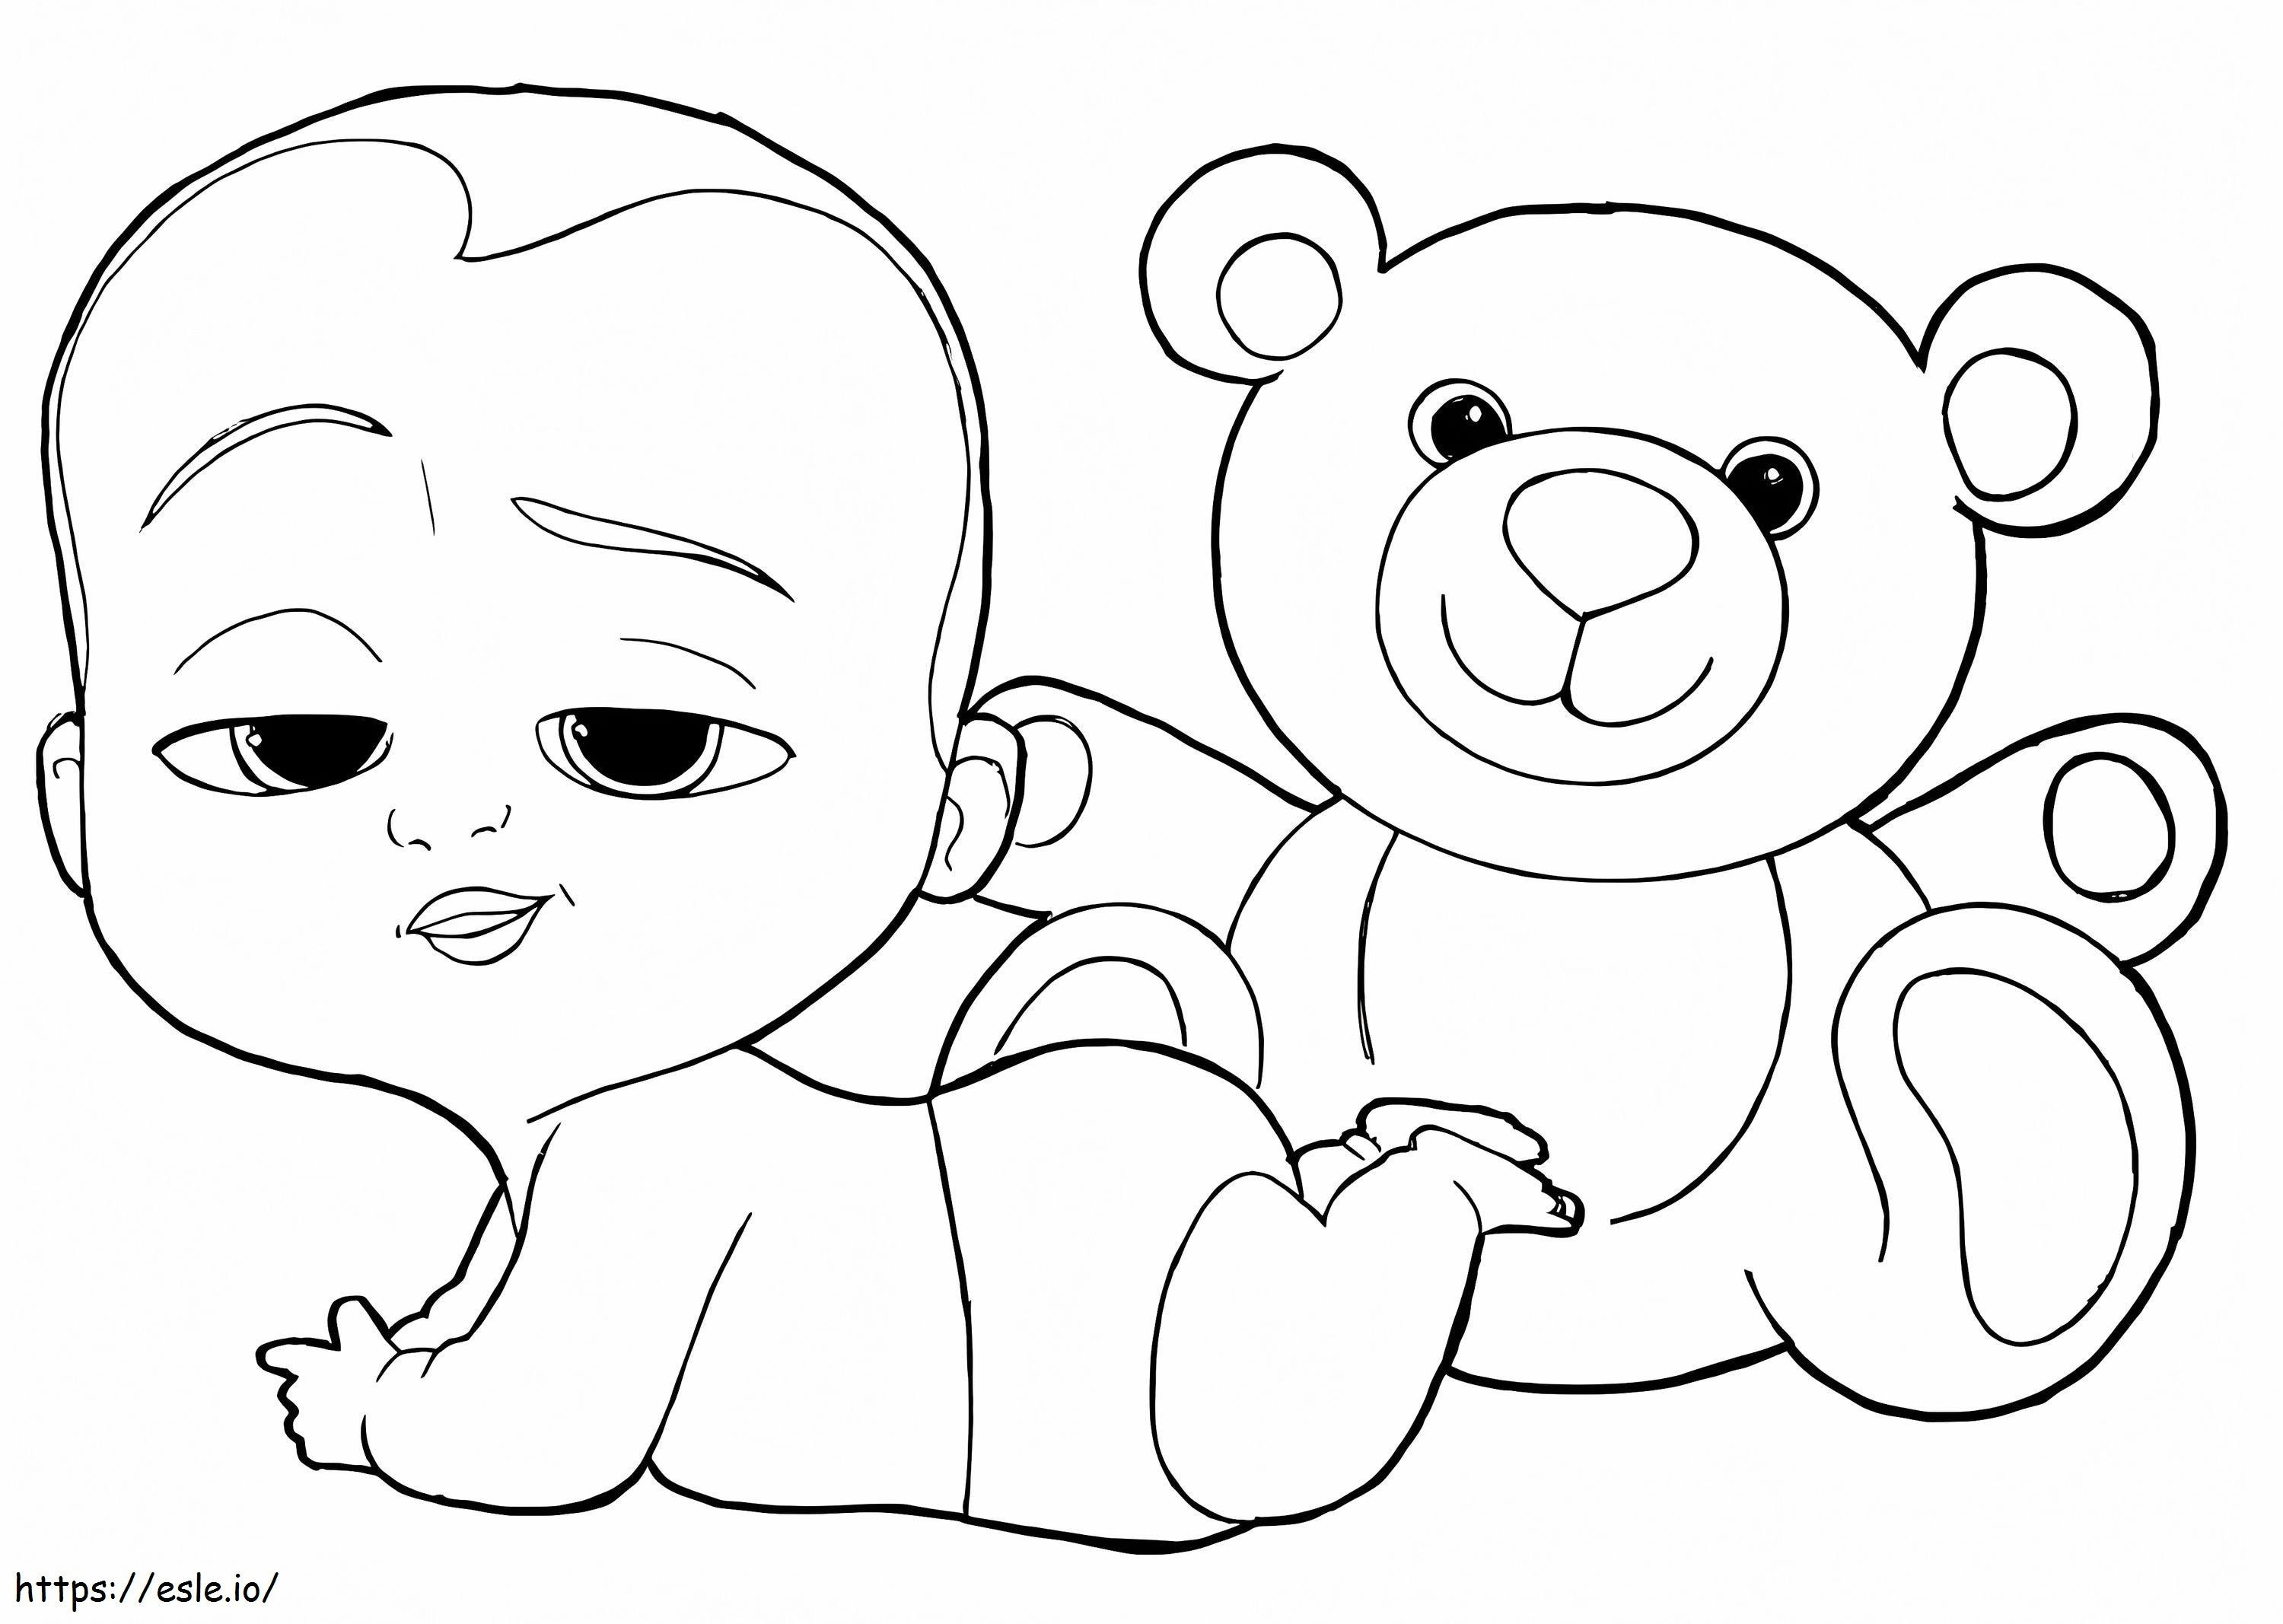 Baby Boss With Teddy Bear coloring page